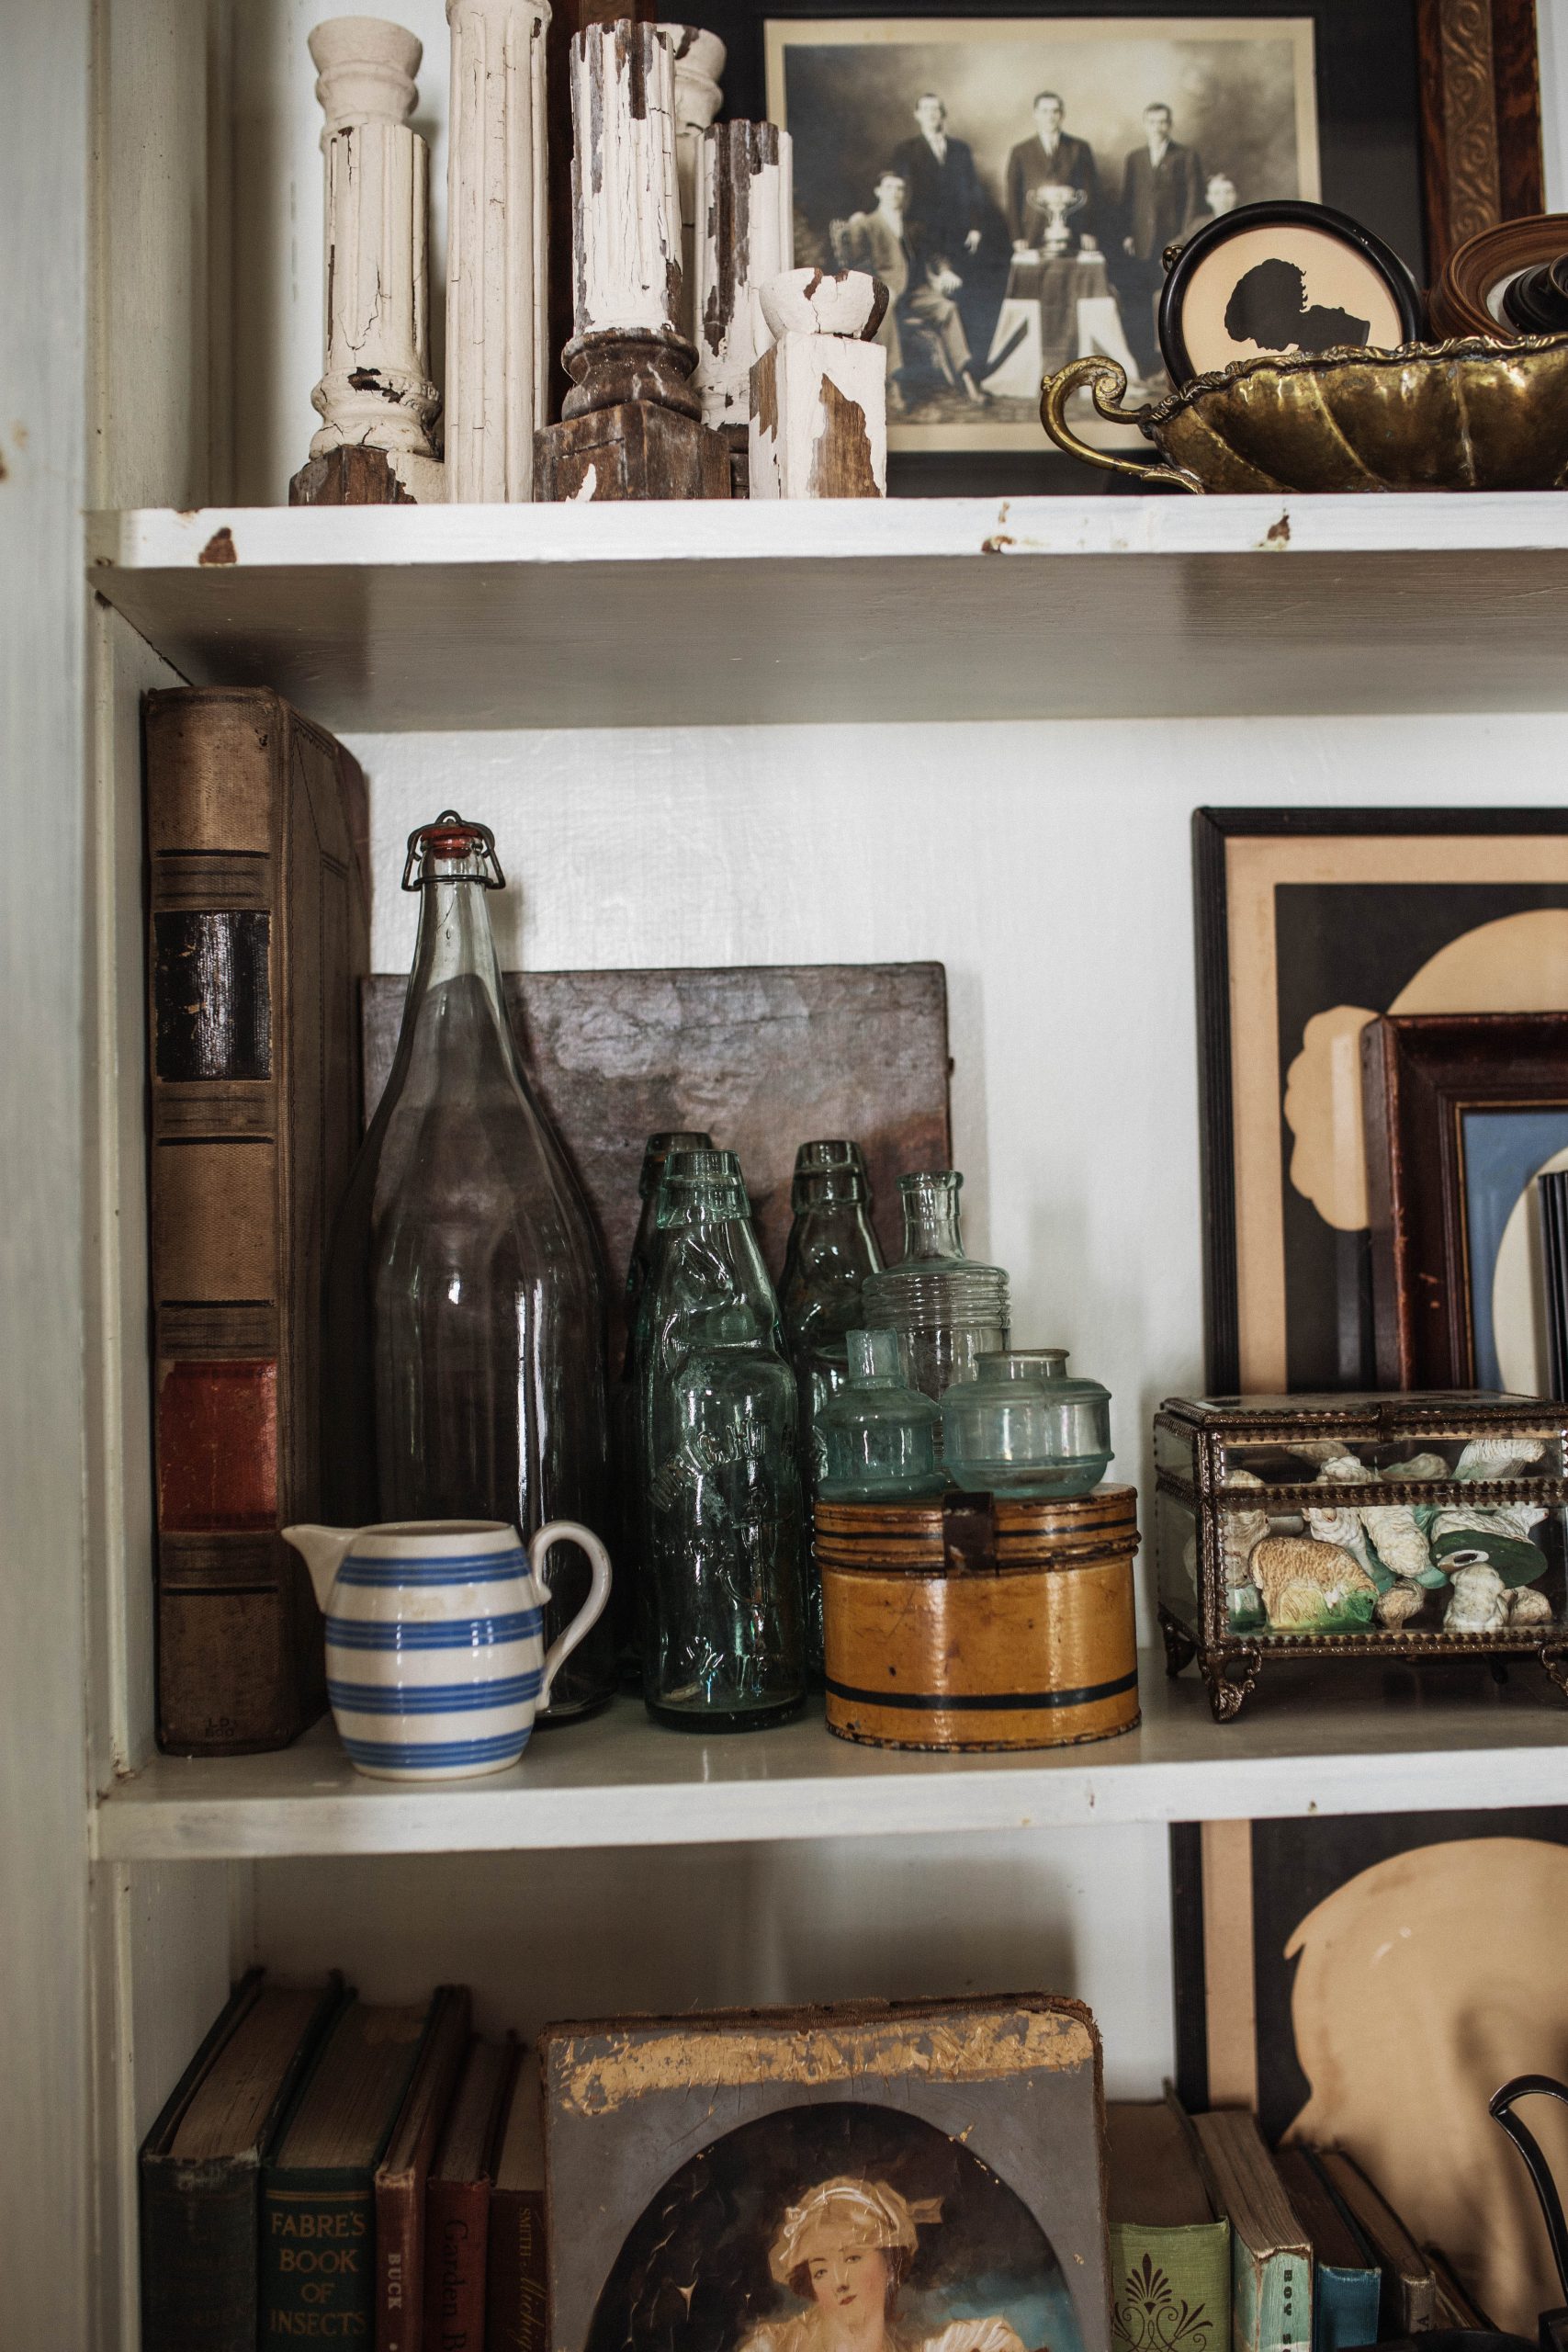 Vintage collections without the clutter